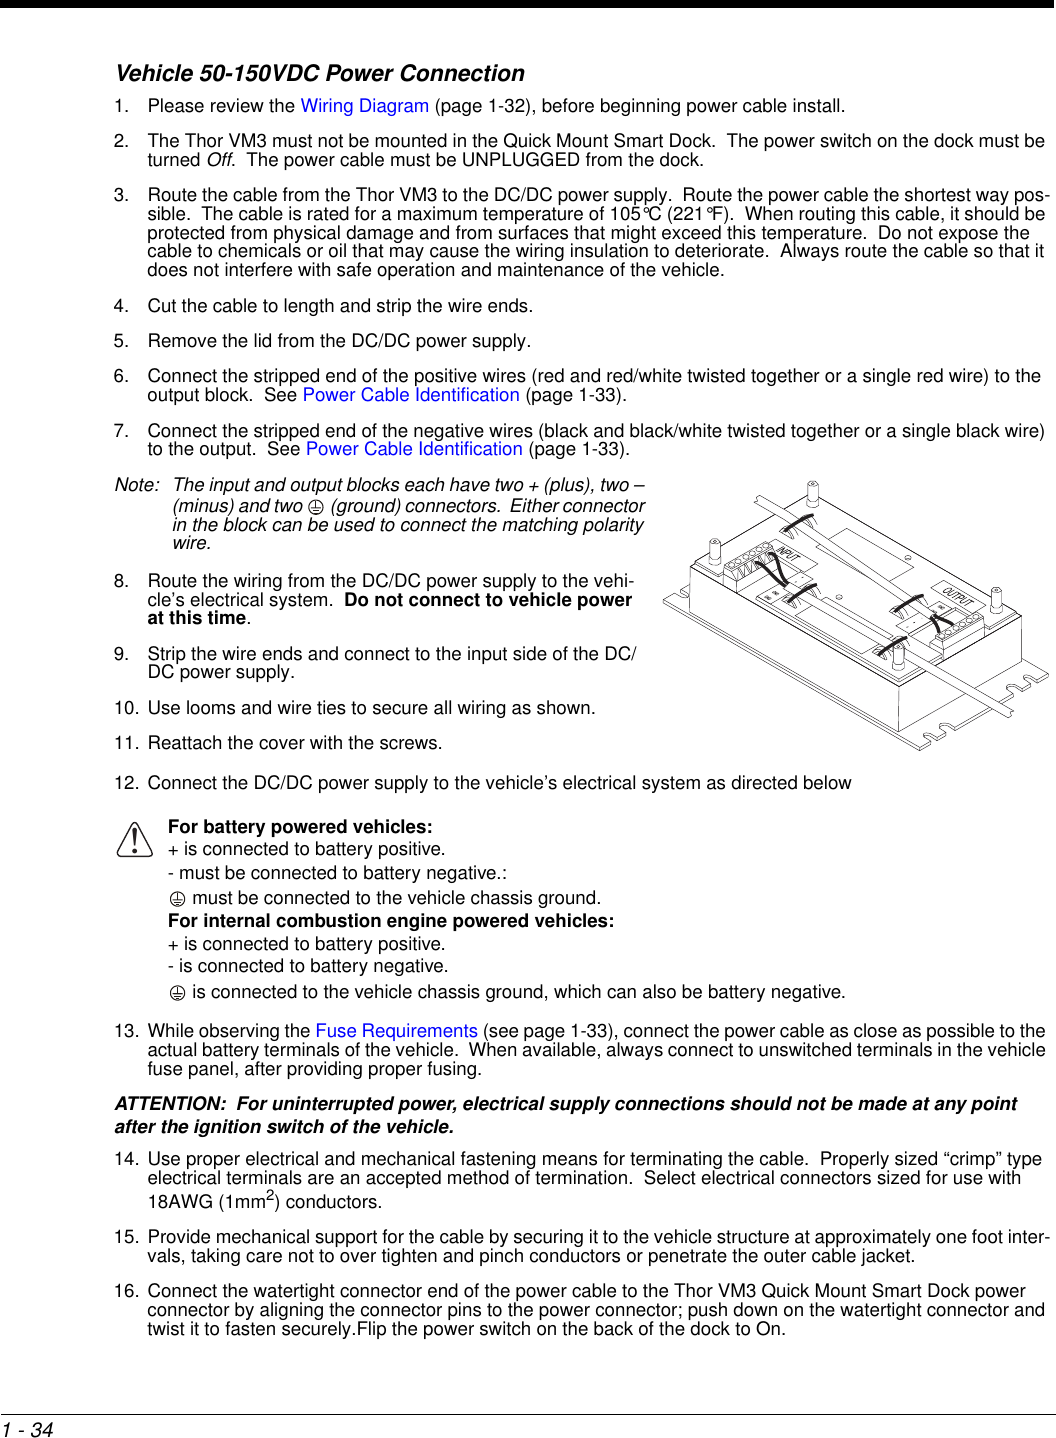 1 - 34Vehicle 50-150VDC Power Connection1. Please review the Wiring Diagram (page 1-32), before beginning power cable install.  2. The Thor VM3 must not be mounted in the Quick Mount Smart Dock.  The power switch on the dock must be turned Off.  The power cable must be UNPLUGGED from the dock.3. Route the cable from the Thor VM3 to the DC/DC power supply.  Route the power cable the shortest way pos-sible.  The cable is rated for a maximum temperature of 105°C (221°F).  When routing this cable, it should be protected from physical damage and from surfaces that might exceed this temperature.  Do not expose the cable to chemicals or oil that may cause the wiring insulation to deteriorate.  Always route the cable so that it does not interfere with safe operation and maintenance of the vehicle.4. Cut the cable to length and strip the wire ends.5. Remove the lid from the DC/DC power supply.6. Connect the stripped end of the positive wires (red and red/white twisted together or a single red wire) to the output block.  See Power Cable Identification (page 1-33).7. Connect the stripped end of the negative wires (black and black/white twisted together or a single black wire) to the output.  See Power Cable Identification (page 1-33).Note: The input and output blocks each have two + (plus), two – (minus) and two   (ground) connectors.  Either connector in the block can be used to connect the matching polarity wire.8. Route the wiring from the DC/DC power supply to the vehi-cle’s electrical system.  Do not connect to vehicle power at this time.9. Strip the wire ends and connect to the input side of the DC/DC power supply.10. Use looms and wire ties to secure all wiring as shown. 11. Reattach the cover with the screws.12. Connect the DC/DC power supply to the vehicle’s electrical system as directed below13. While observing the Fuse Requirements (see page 1-33), connect the power cable as close as possible to the actual battery terminals of the vehicle.  When available, always connect to unswitched terminals in the vehicle fuse panel, after providing proper fusing.ATTENTION:  For uninterrupted power, electrical supply connections should not be made at any point after the ignition switch of the vehicle.14. Use proper electrical and mechanical fastening means for terminating the cable.  Properly sized “crimp” type electrical terminals are an accepted method of termination.  Select electrical connectors sized for use with 18AWG (1mm2) conductors.15. Provide mechanical support for the cable by securing it to the vehicle structure at approximately one foot inter-vals, taking care not to over tighten and pinch conductors or penetrate the outer cable jacket.16. Connect the watertight connector end of the power cable to the Thor VM3 Quick Mount Smart Dock power connector by aligning the connector pins to the power connector; push down on the watertight connector and twist it to fasten securely.Flip the power switch on the back of the dock to On.For battery powered vehicles:+ is connected to battery positive.- must be connected to battery negative.: must be connected to the vehicle chassis ground.For internal combustion engine powered vehicles:+ is connected to battery positive.- is connected to battery negative. is connected to the vehicle chassis ground, which can also be battery negative.!